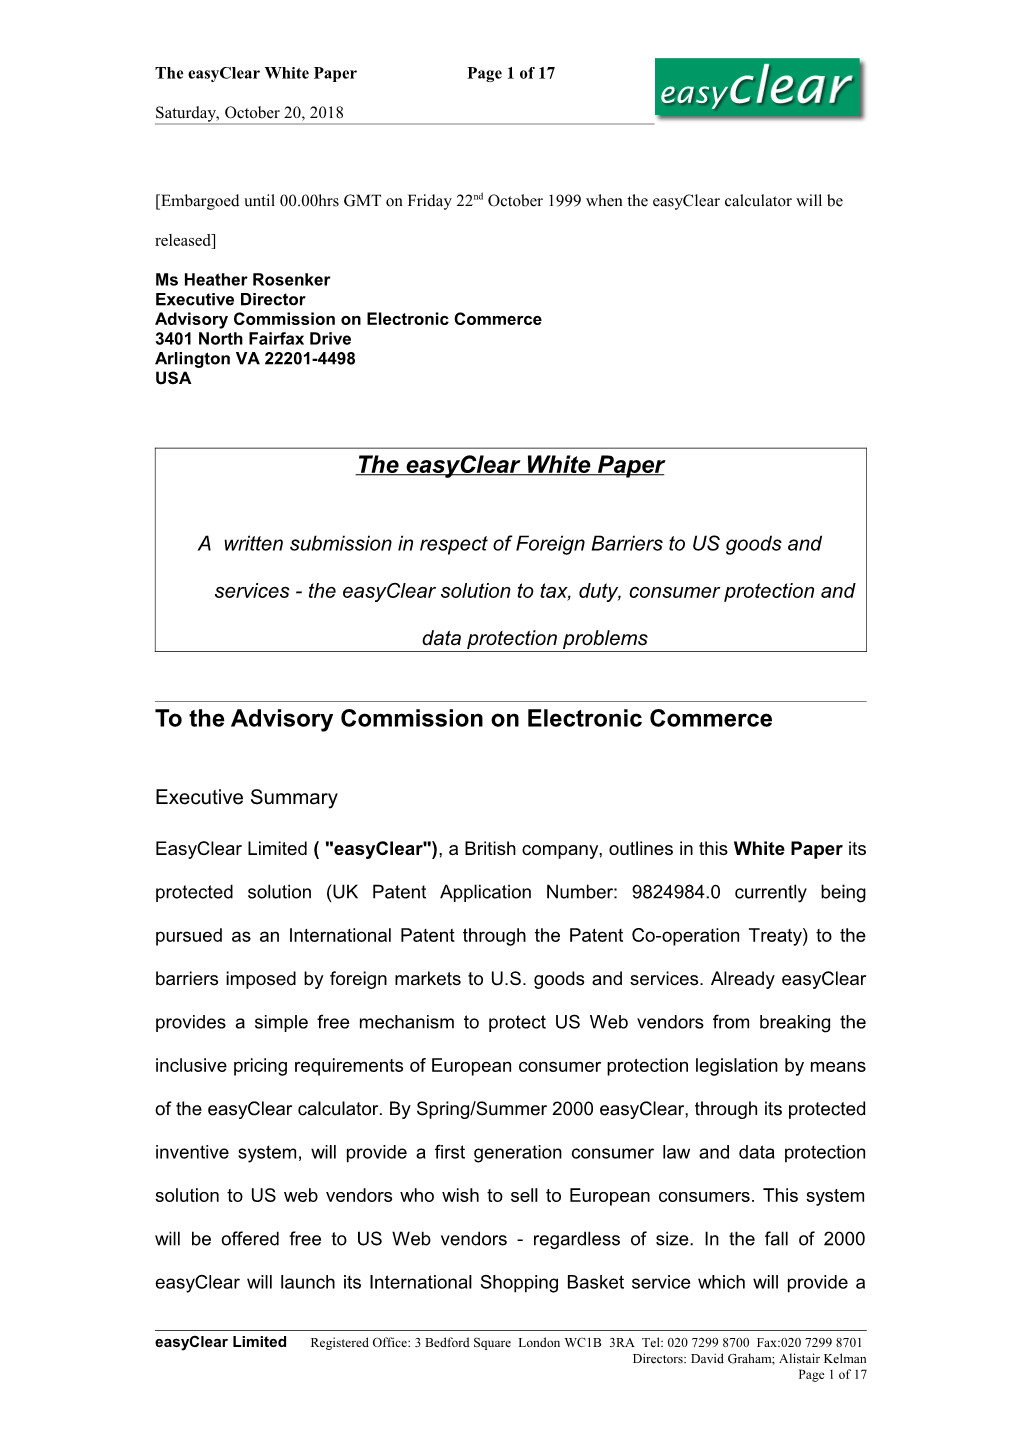 The Easyclear White Paper